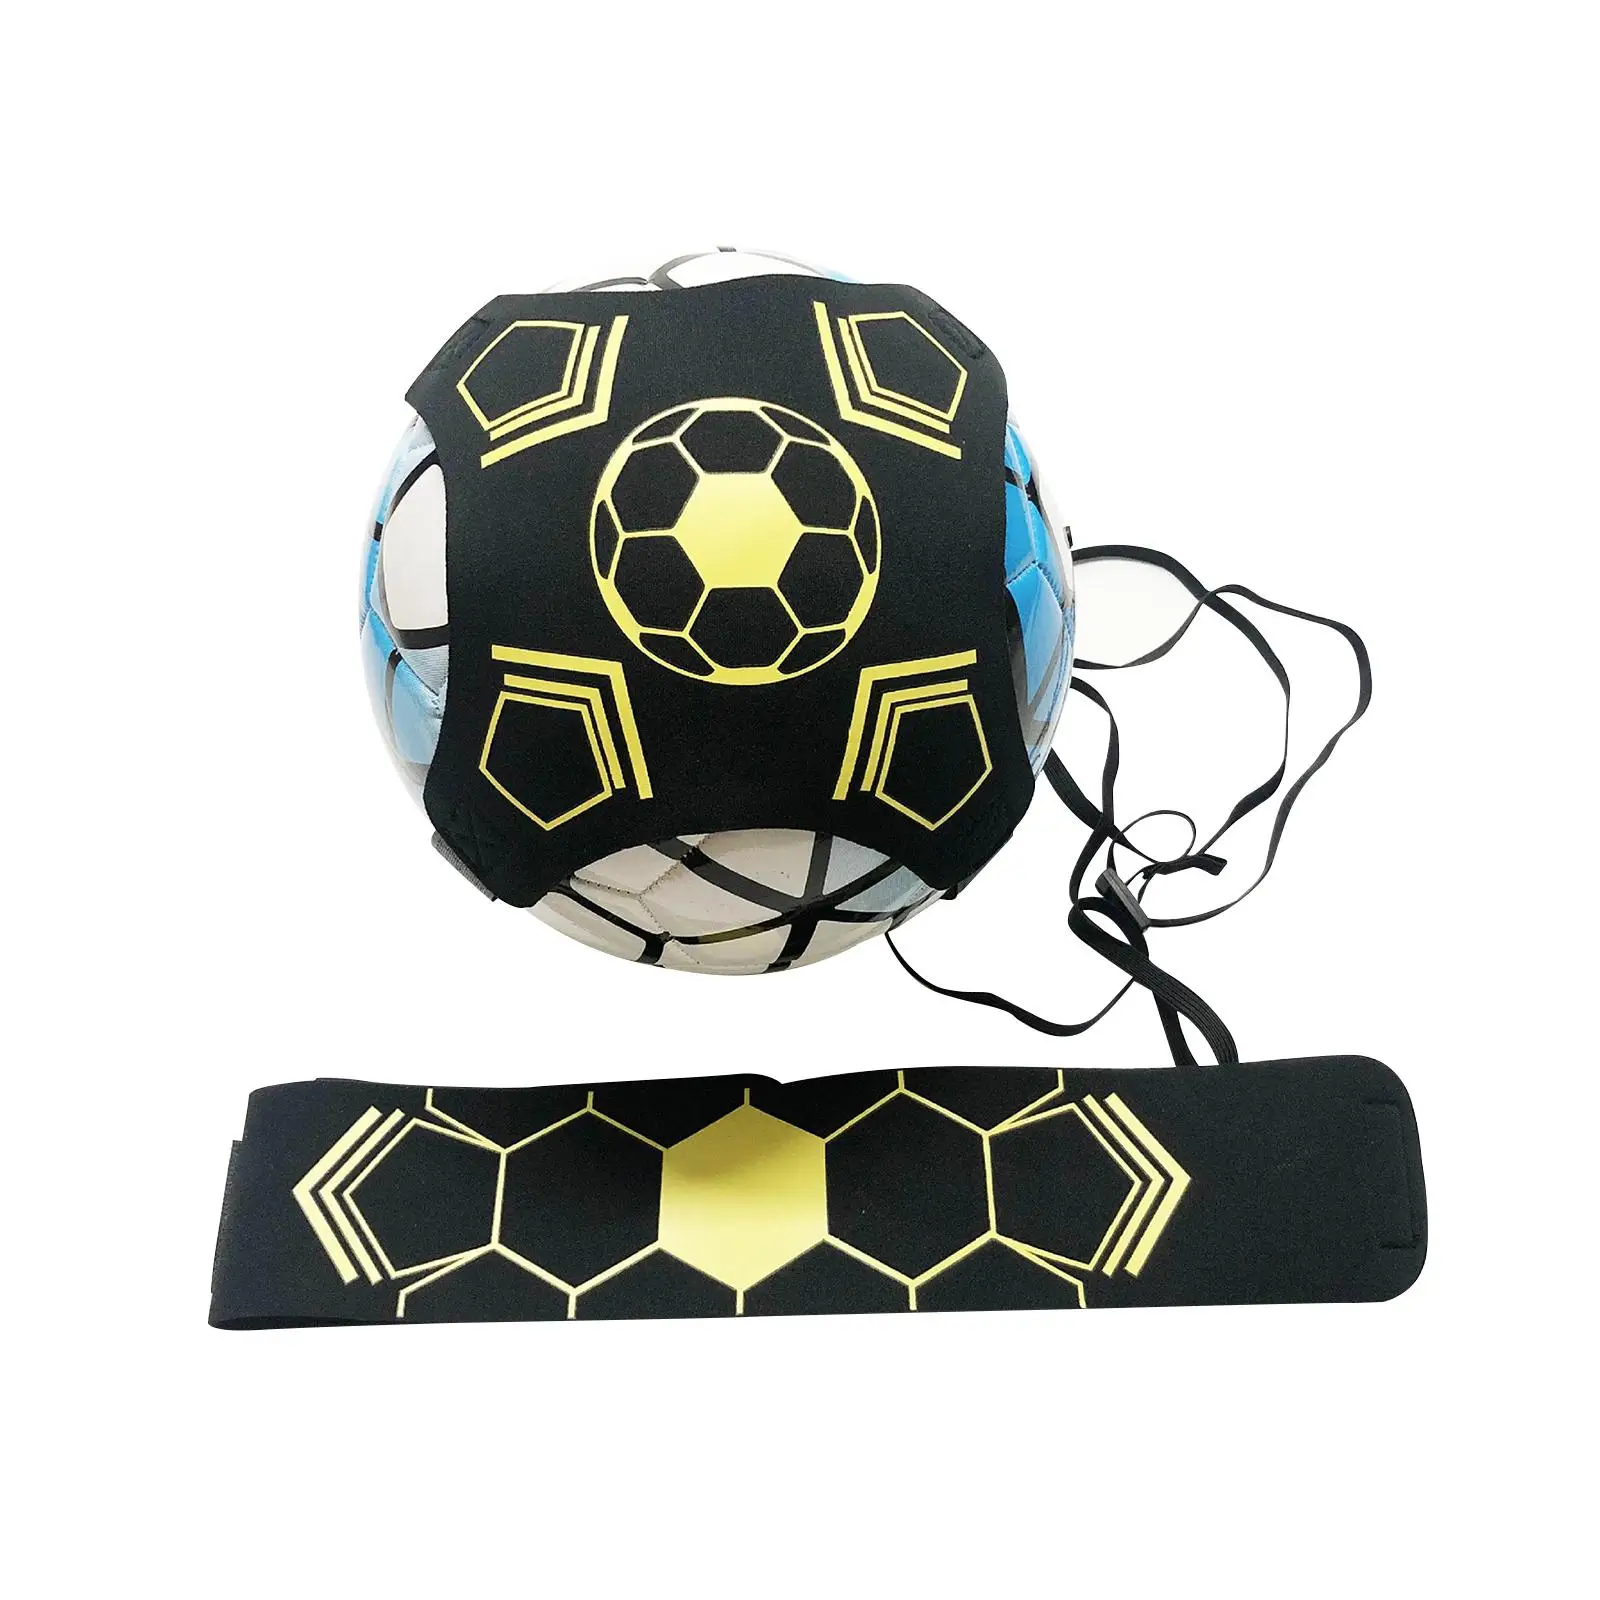 Kick Throw Solo Practice Equipment Adjustable Waist Belt Control Skills Soccer Trainer for Ball 3, 4,and 5 Kids Adult Volleyball